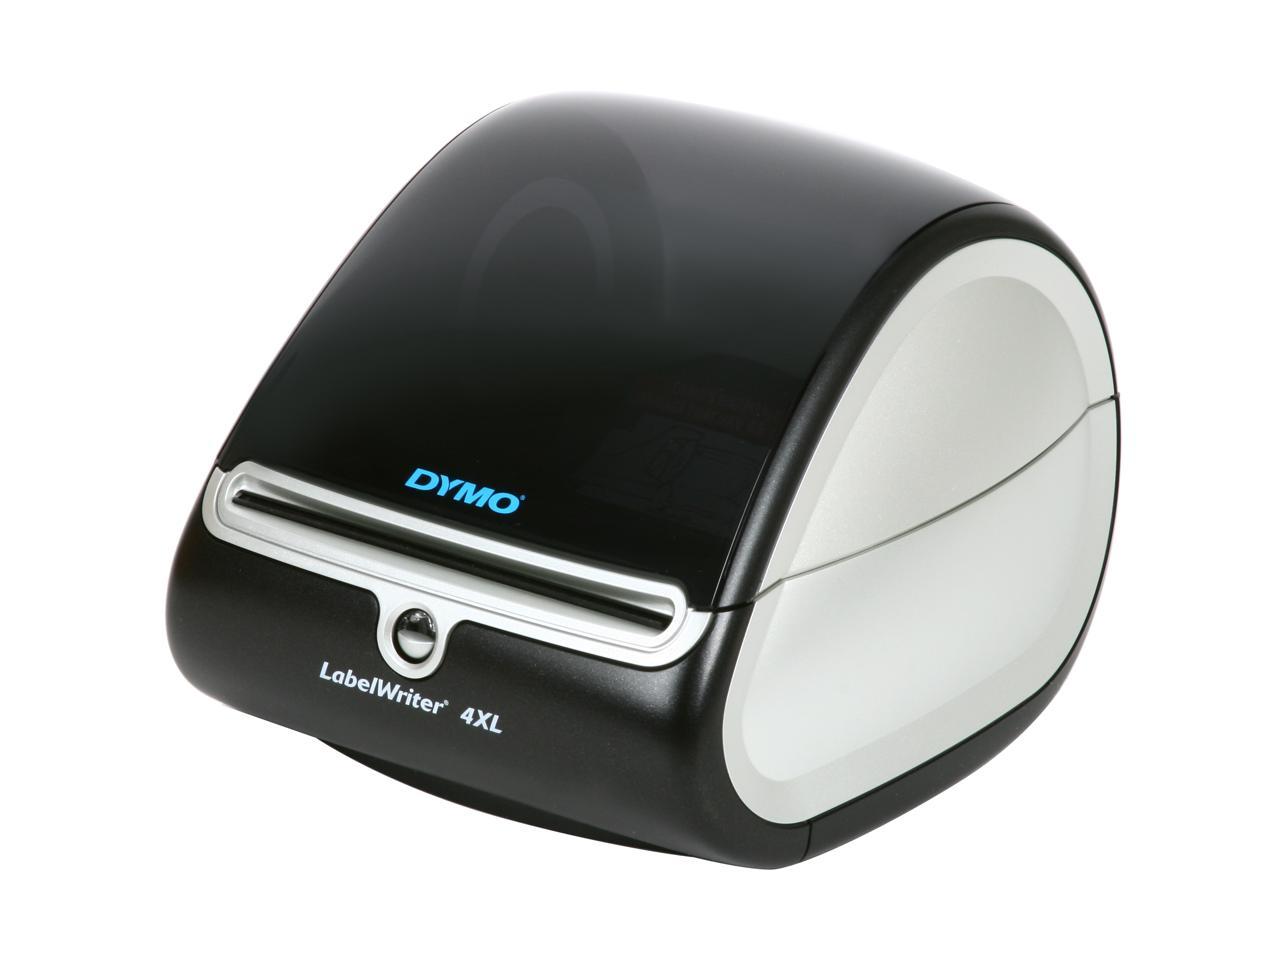 install dymo stamps software